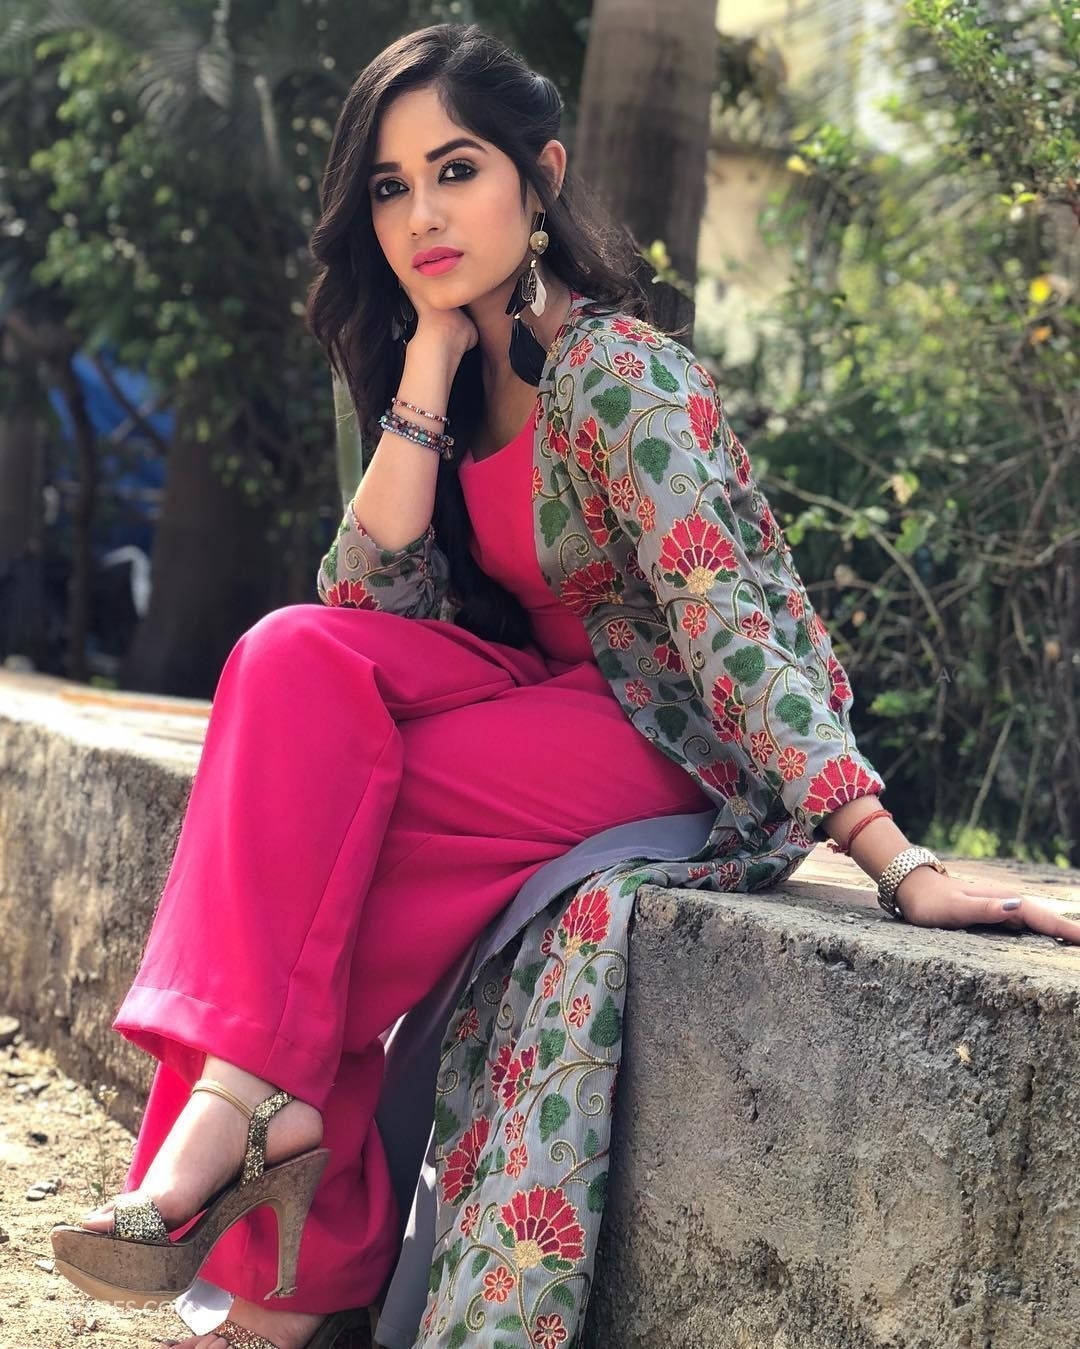 Jannat Zubair Rahmani's Sultry Photos Are Breaking The Internet, Have a Look